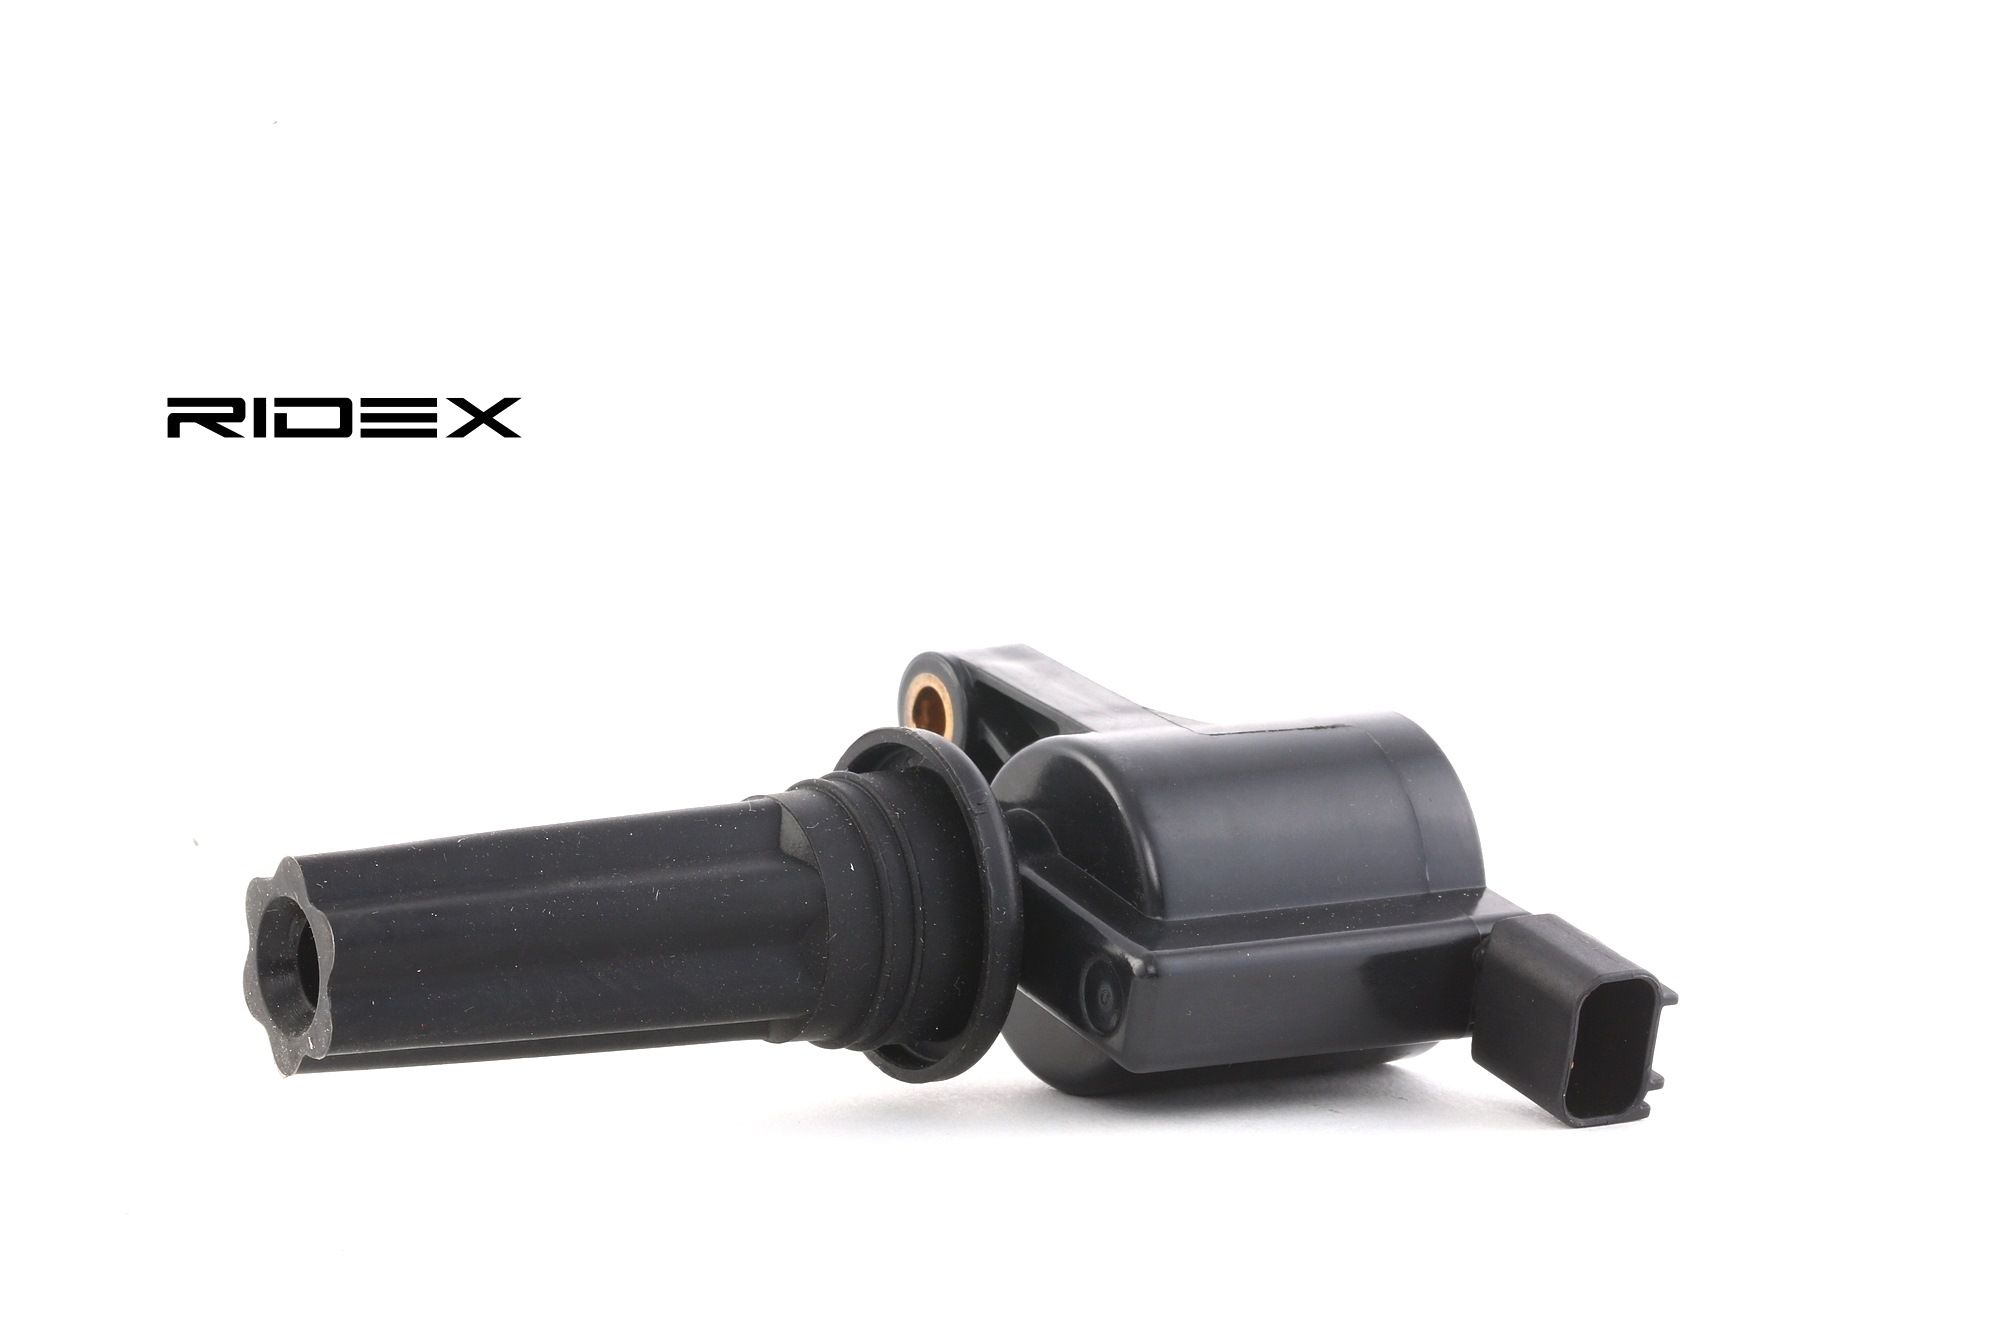 RIDEX 689C0056 Ignition coil 2-pin connector, 12V, with integrated switch, Flush-Fitting Pencil Ignition Coils, incl. spark plug connector